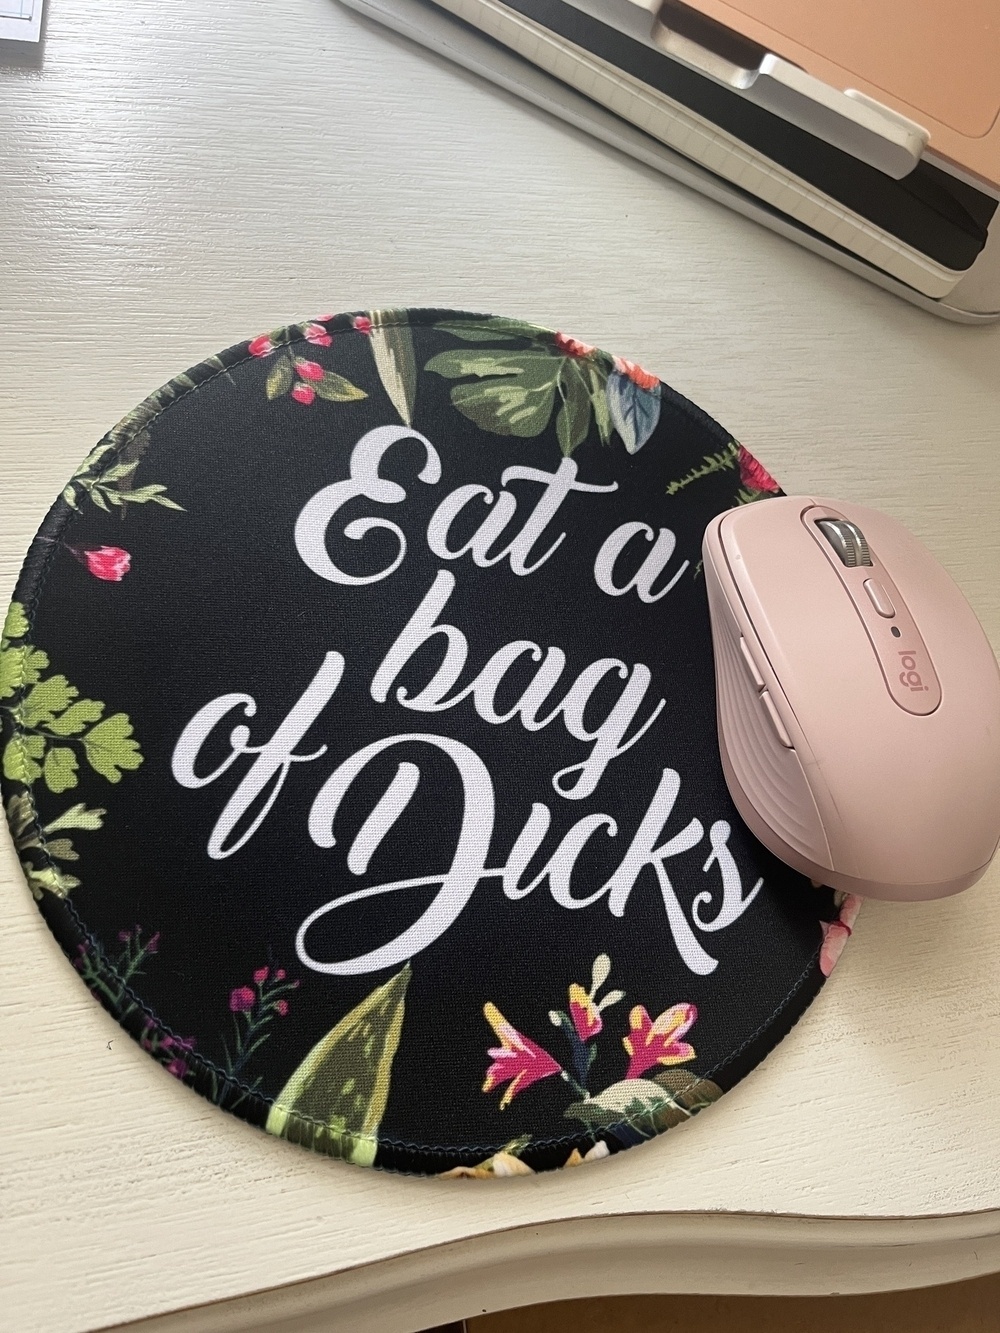 A black floral mousepad with the words “eat a bag of dicks” in script across it next to a pink computer mouse